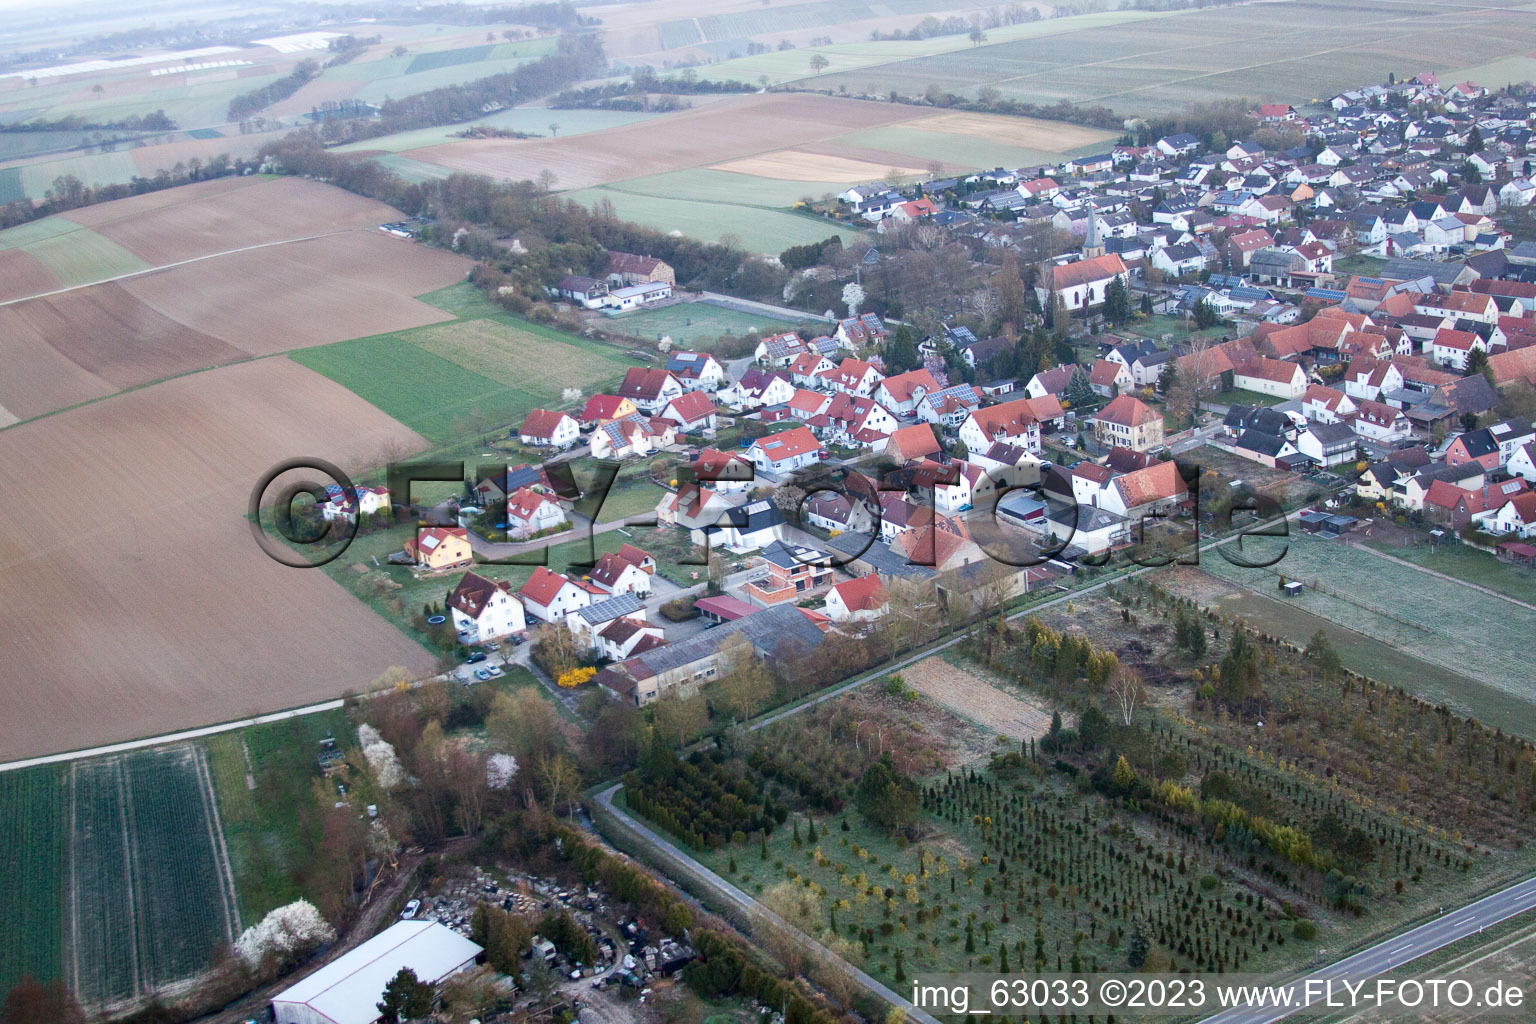 Freckenfeld in the state Rhineland-Palatinate, Germany from the plane